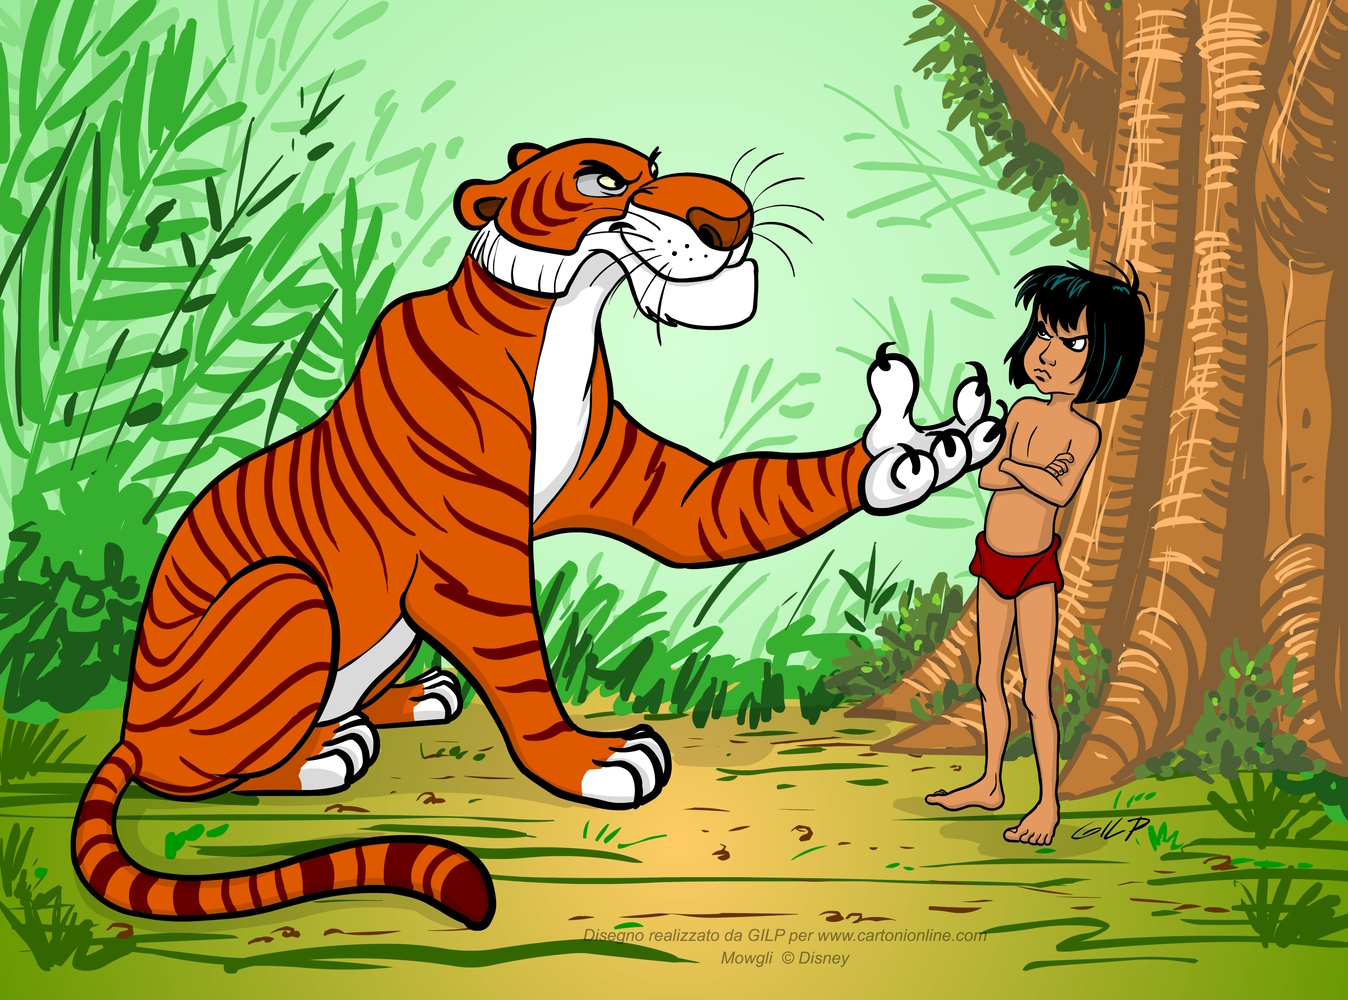 Mowgli and the tiger Shere Khan